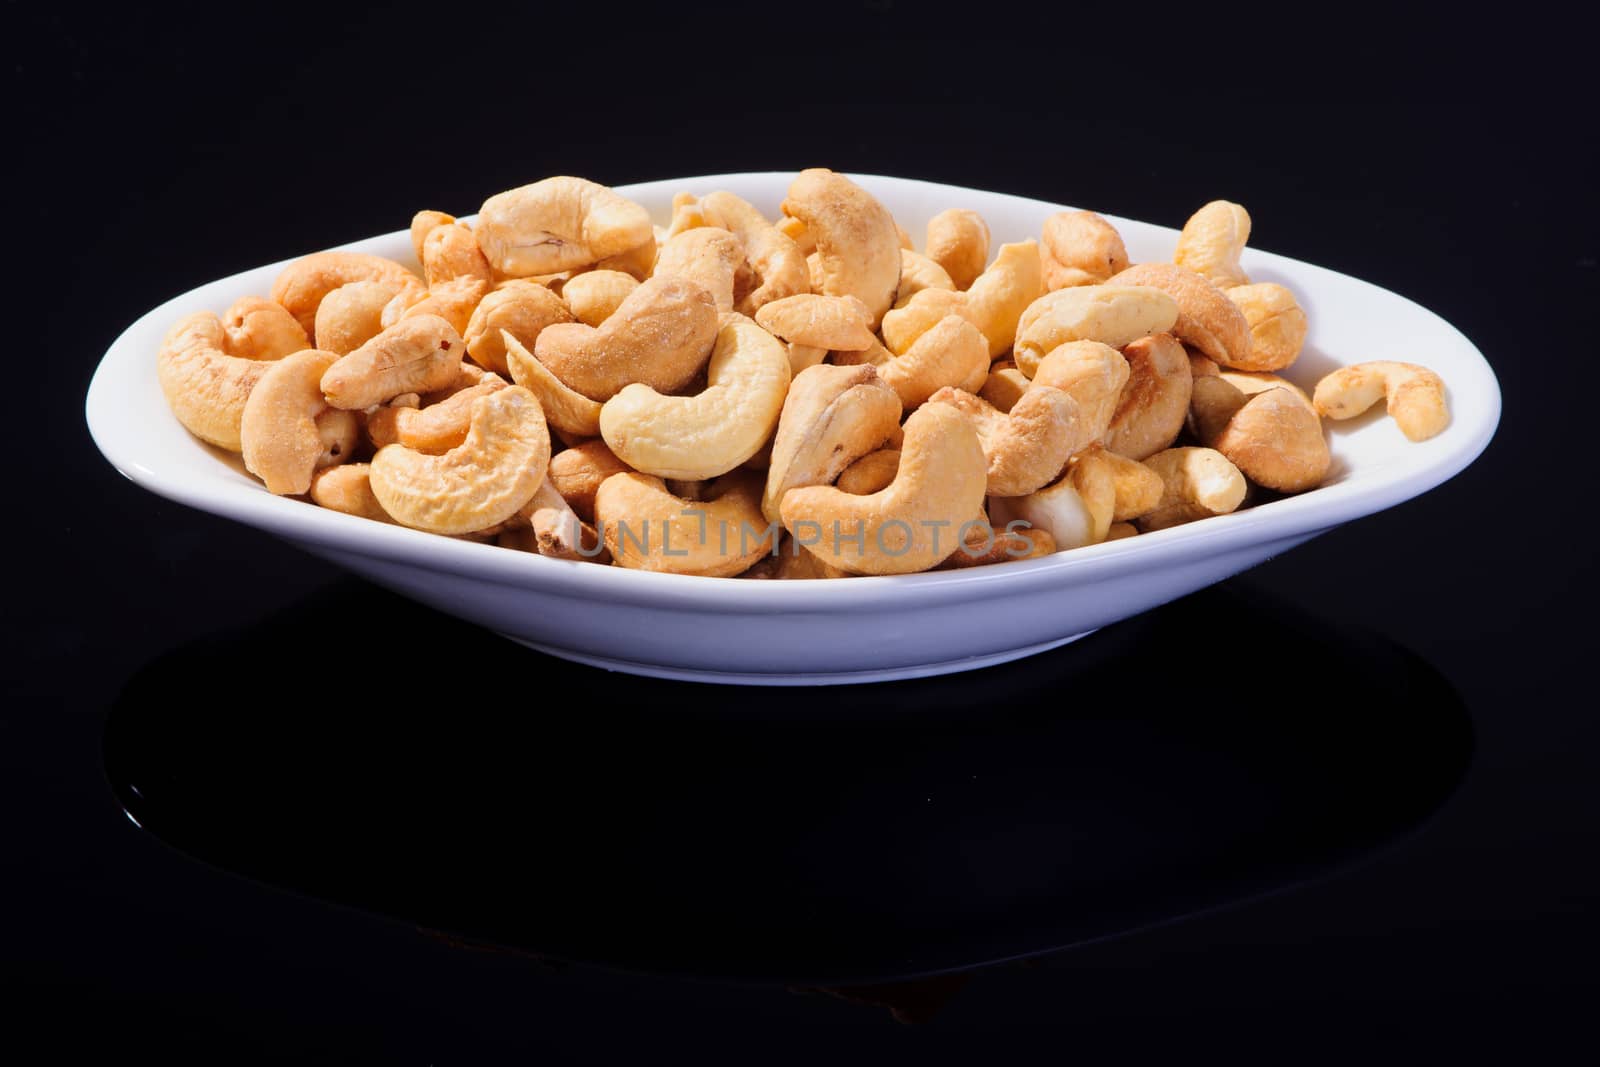 Salted Cashew Nuts by RnDmS